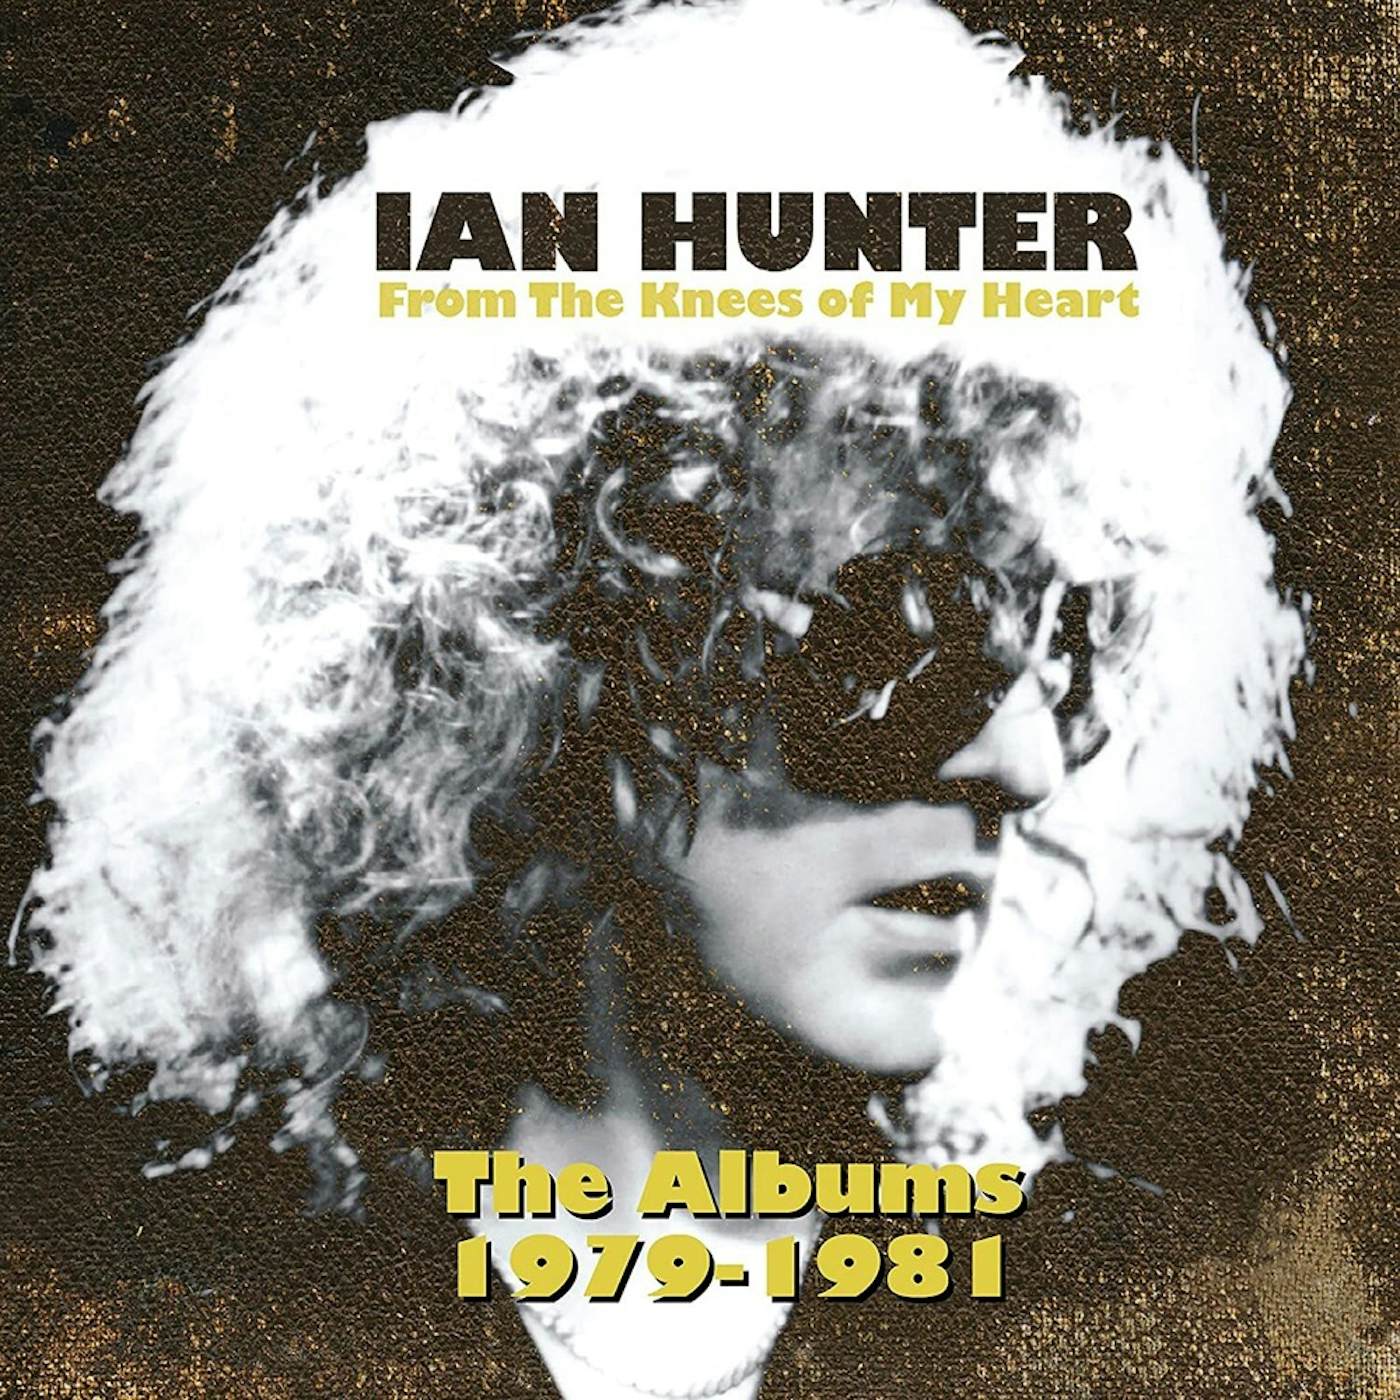 Ian Hunter From The Knees of My Heart (The Albums 1979-1981) CD